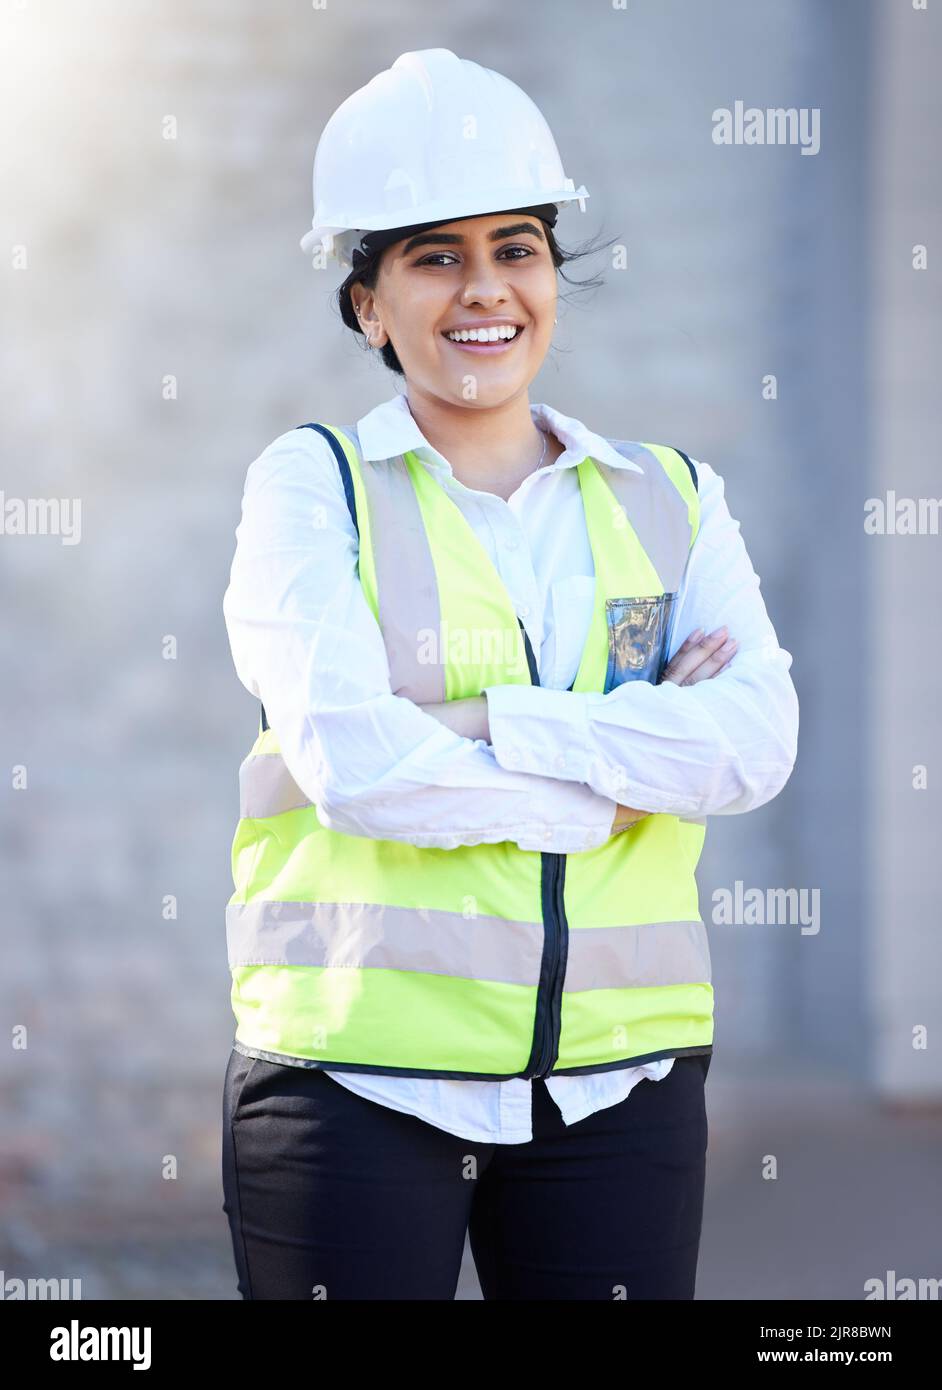 Construction, building and engineering with a woman contractor or technician outside on a build site for development, renovation or remodel Stock Photo